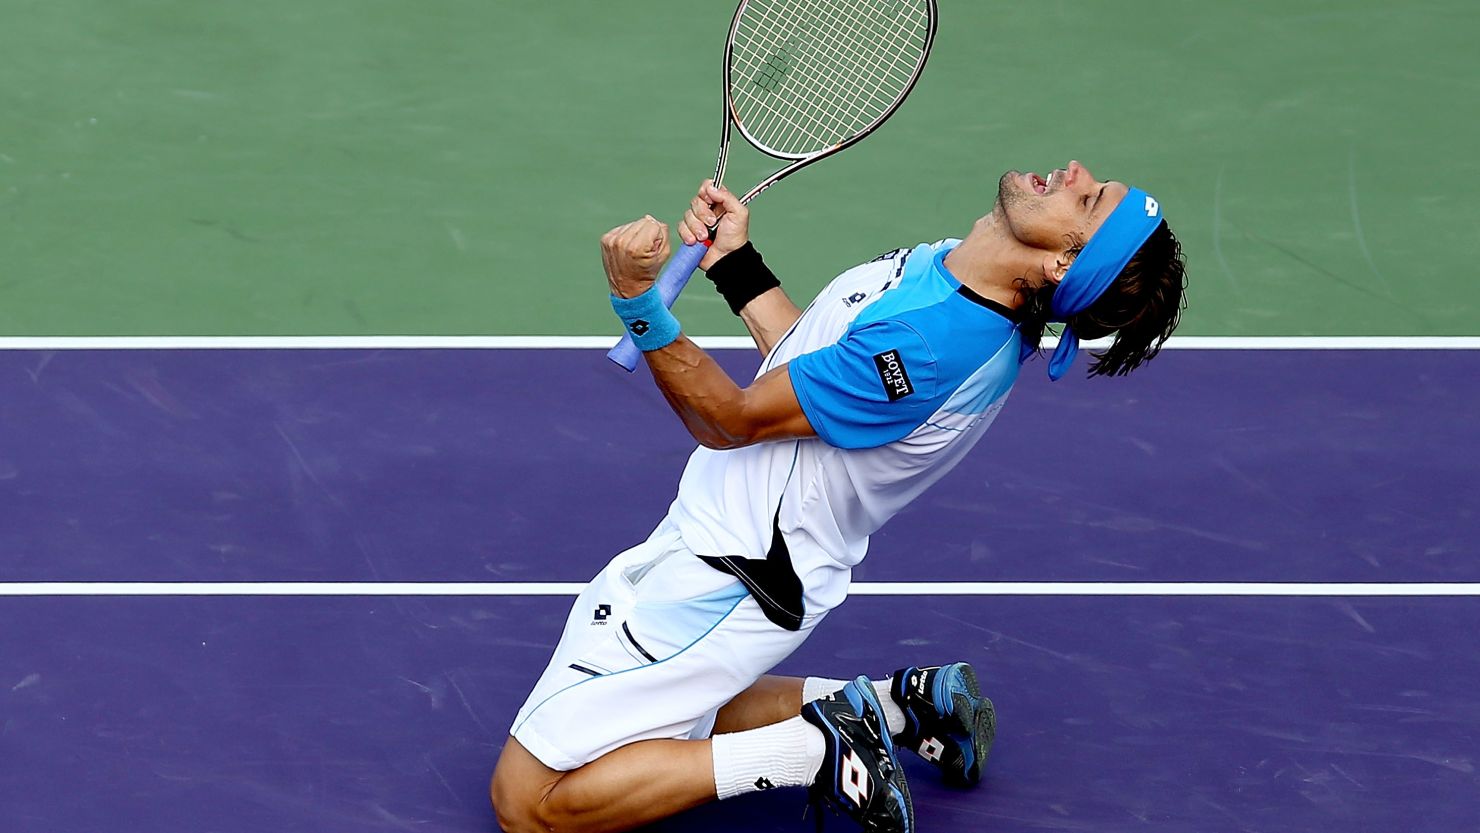 David Ferrer lets out his emotion after beating Tommy Haas to reach his first Miami Masters final. 